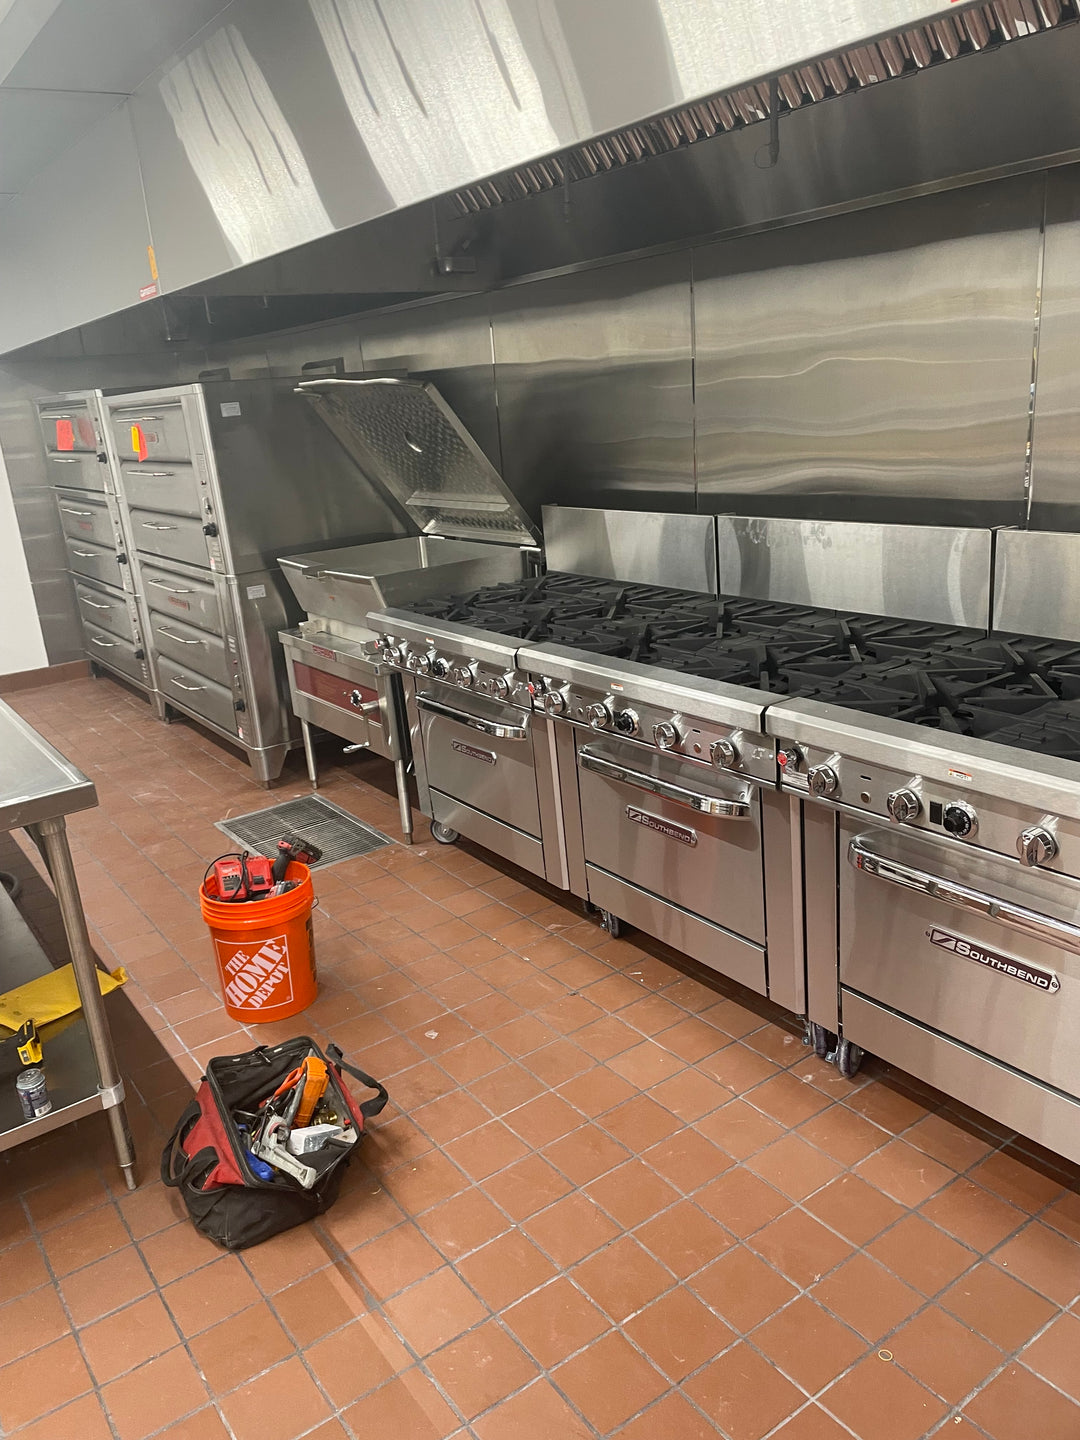 line up cooking equipment under 20-foot hood for mass production in a church kitchen